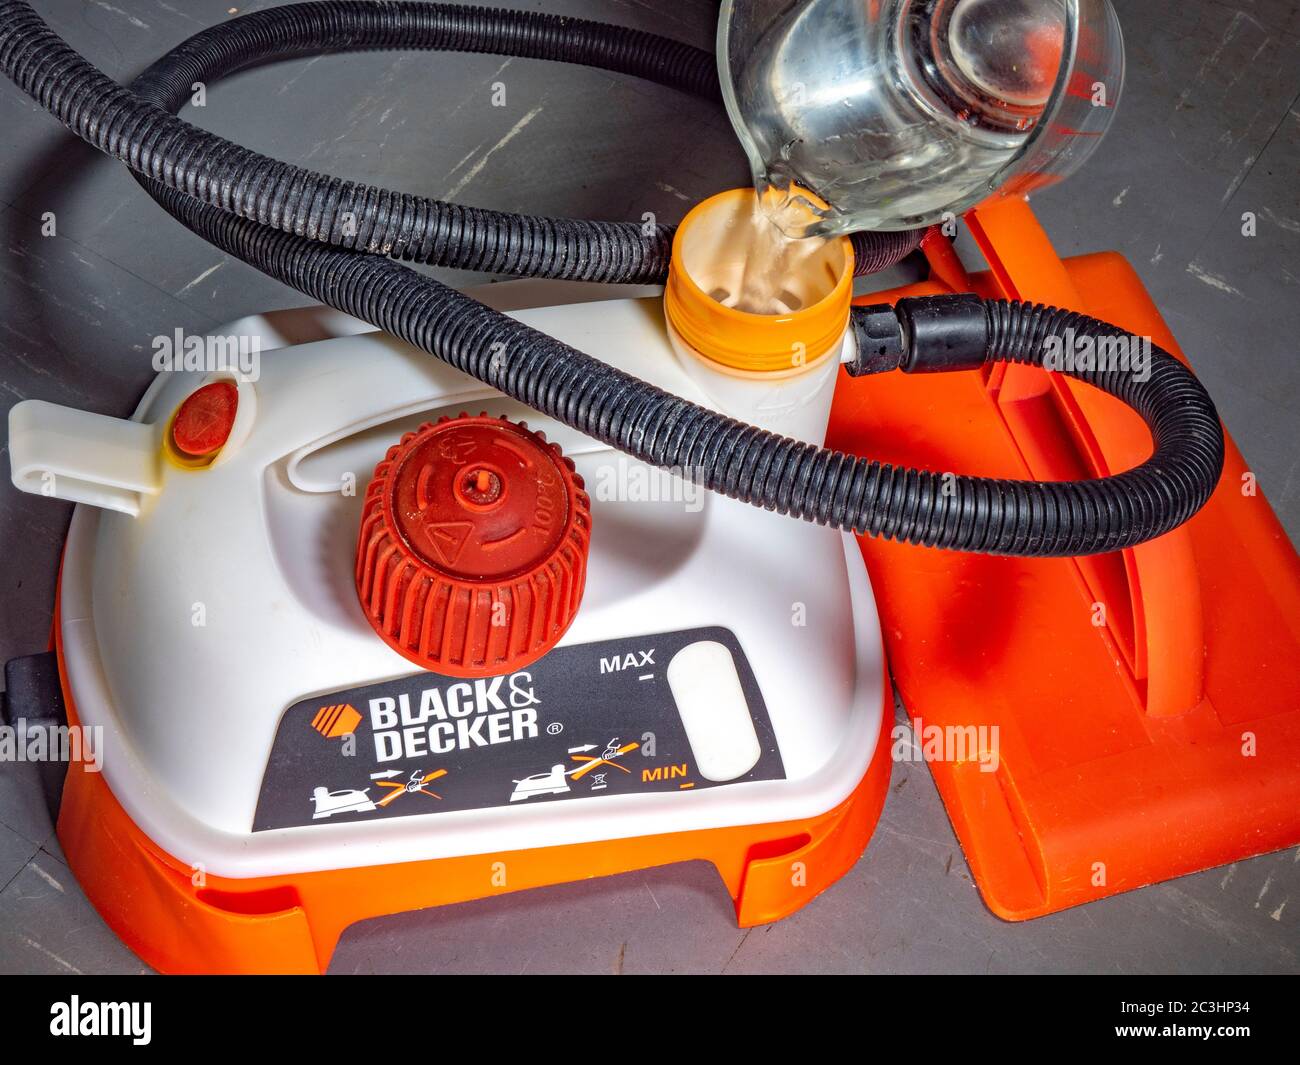 https://c8.alamy.com/comp/2C3HP34/water-being-poured-into-the-filler-cap-of-a-black-decker-orange-and-white-plastic-wallpaper-stripper-with-associated-hose-and-steam-plate-2C3HP34.jpg